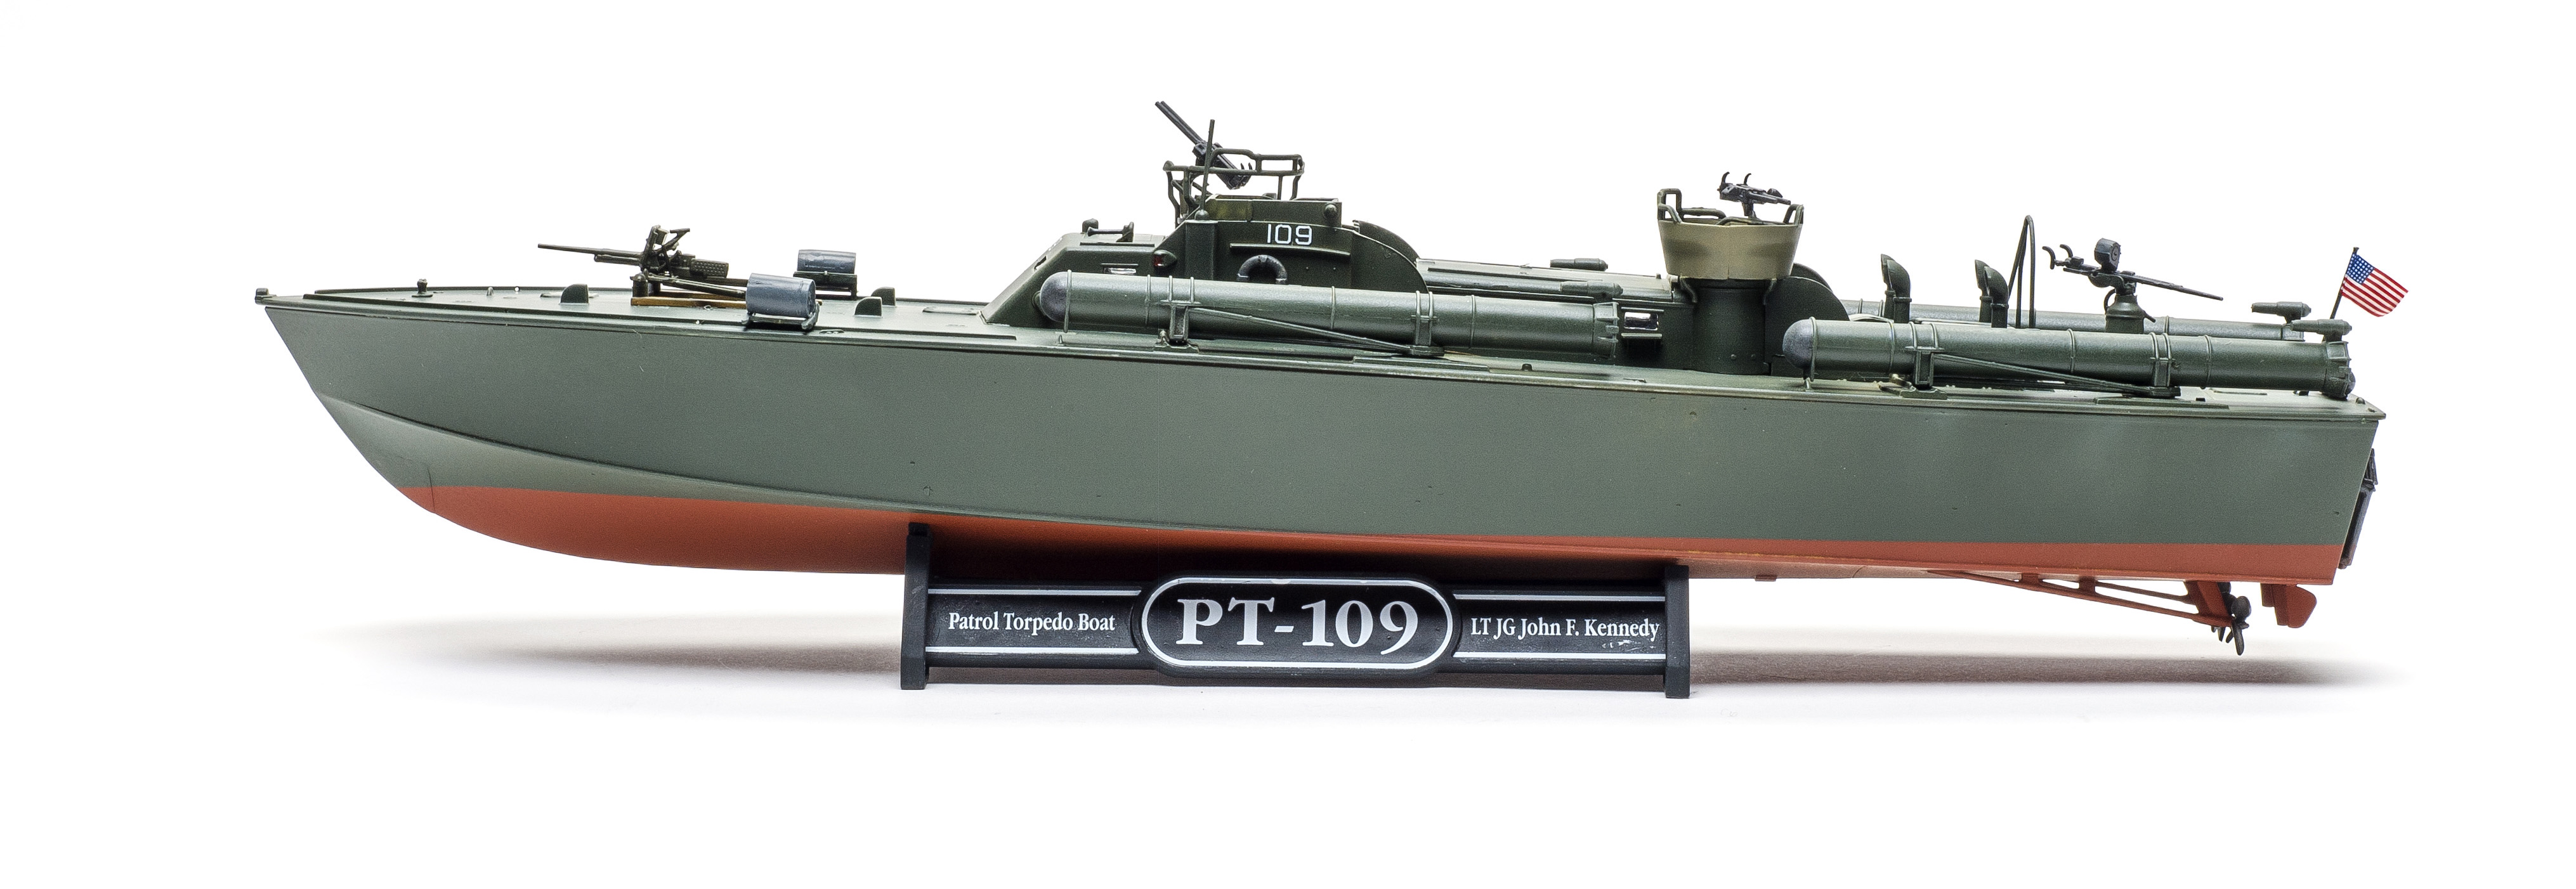 Boat PT-109,Scale 1:72,NEW 4009803051475,A model construction kit of probab...